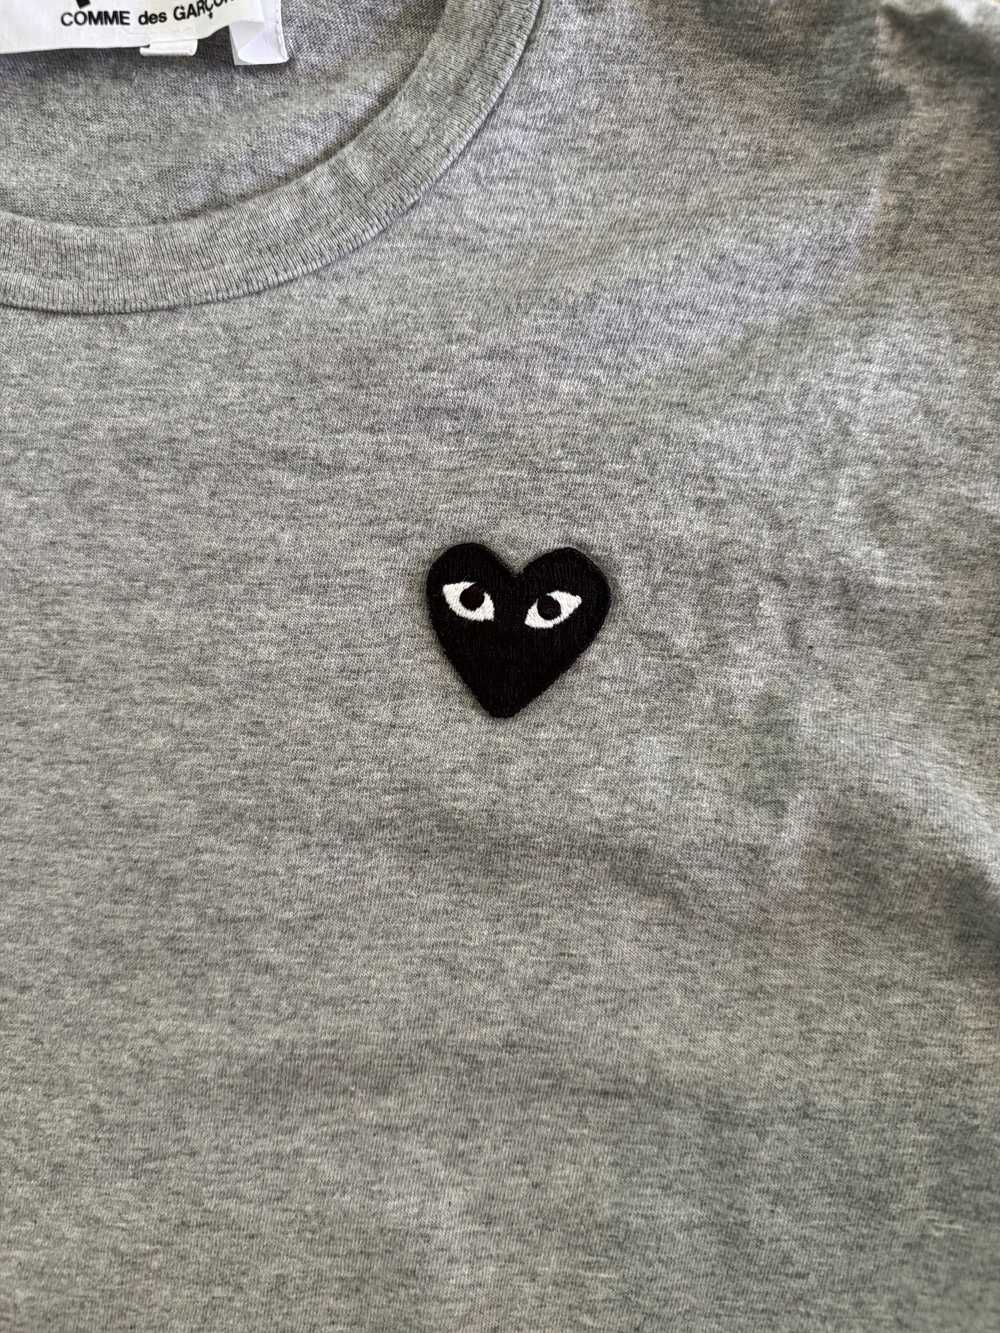 Comme Des Garcons Play CDG Play Long Sleeve Shirt - image 2